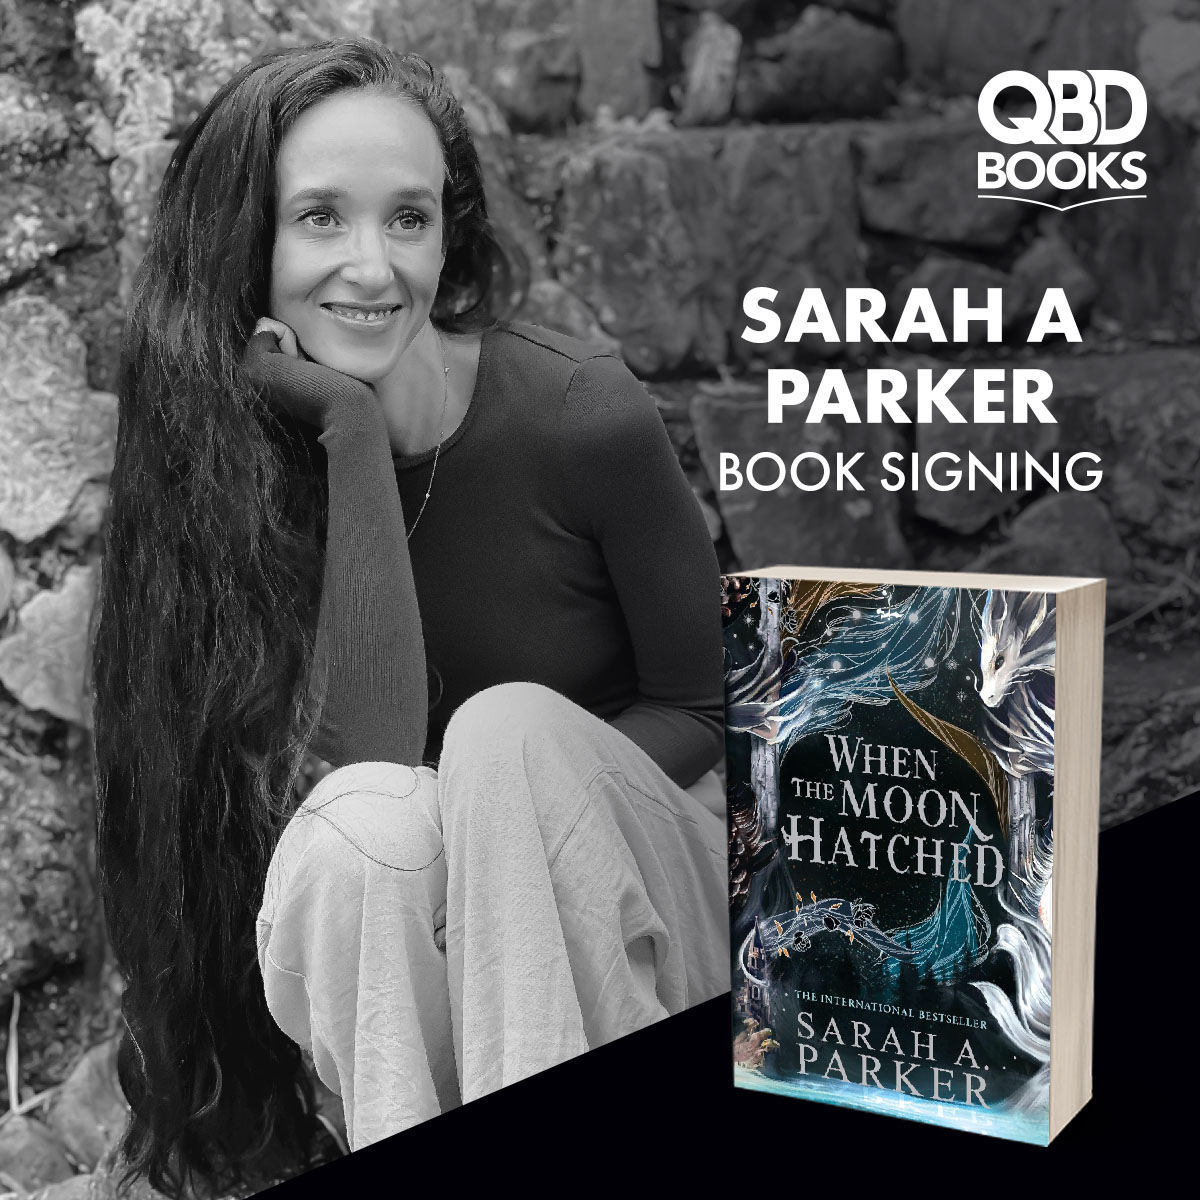 On the 18th of May at our QBD Books Robina store, we have the amazing Sarah A. Parker joining us to sign copies of her dazzling new fantasy romance release, 'When The Moon Hatched'. 🐲✨ To find out more about this amazing event, visit us here: bit.ly/44zdAAo